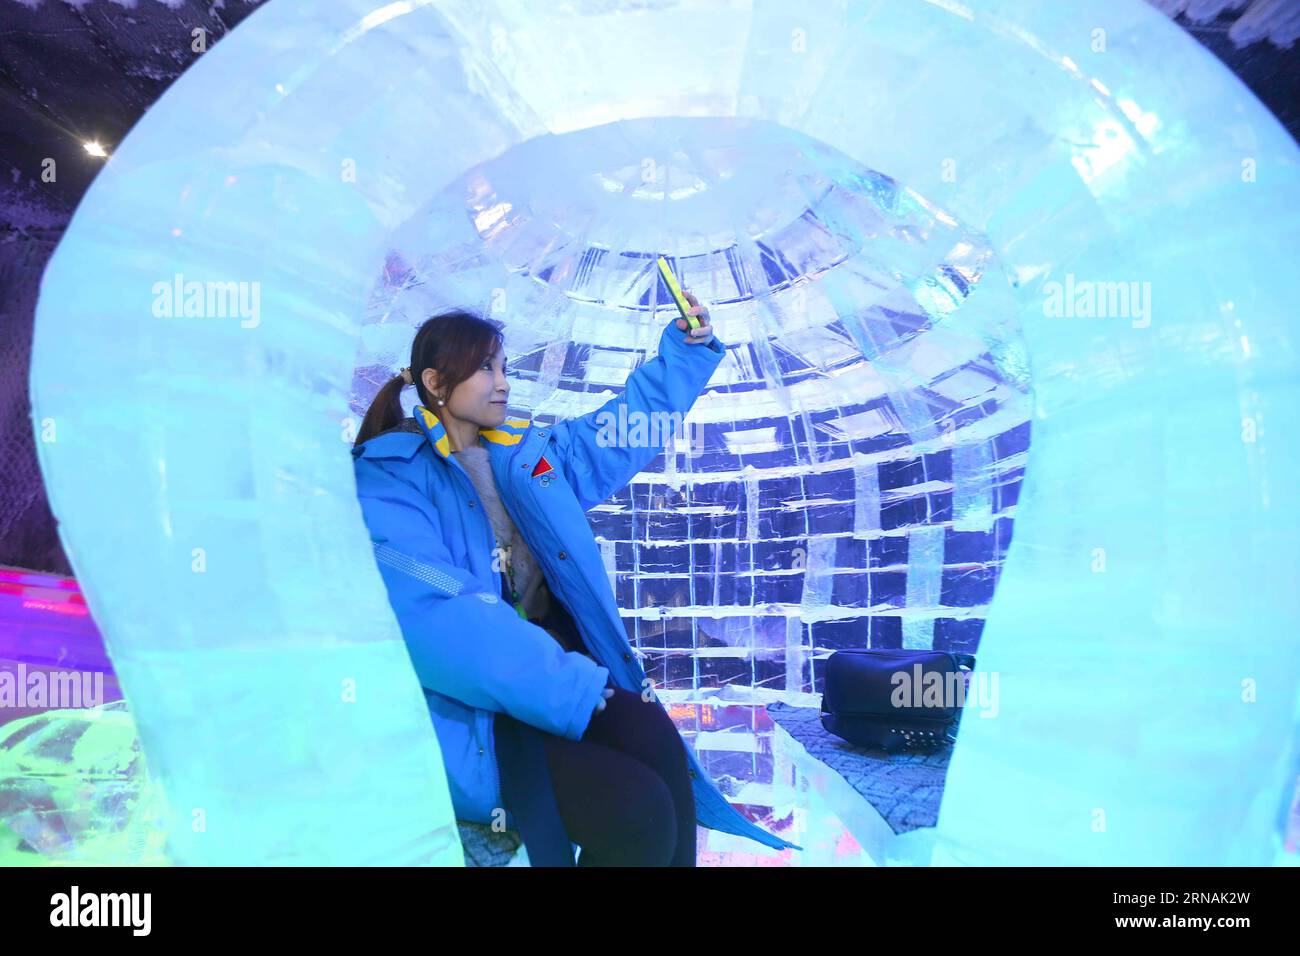 (160130) -- RUIAN (ZHEJIANG) , Jan. 30, 2016 -- A visitor takes selfies with an ice sculpture displayed in an indoor ice sculpture exhibition in Ruian City, east China s Zhejiang Province, Jan. 30, 2016. ) (wyl) CHINA-ZHEJIANG-ICE SCULPTURE (CN) ZhuangxYingchang PUBLICATIONxNOTxINxCHN   Ruian Zhejiang Jan 30 2016 a Visitor Takes selfies With to ICE Sculpture displayed in to Indoor ICE Sculpture Exhibition in Ruian City East China S Zhejiang Province Jan 30 2016 wyl China Zhejiang ICE Sculpture CN  PUBLICATIONxNOTxINxCHN Stock Photo